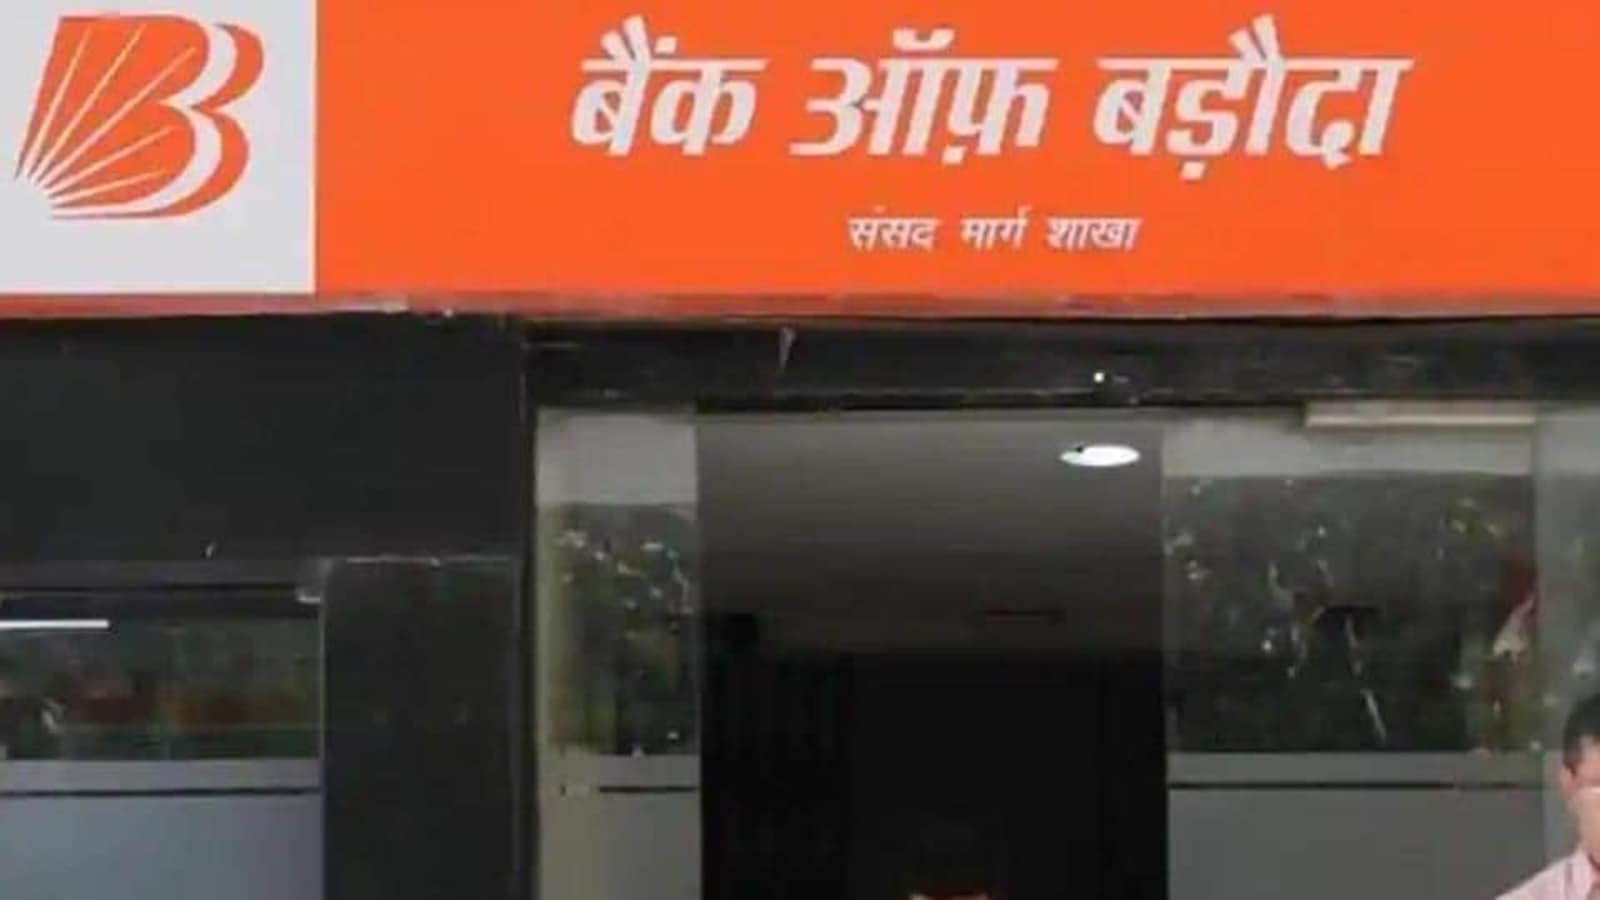 Bank of Baroda IT specialist officer recruitment: Last date to apply